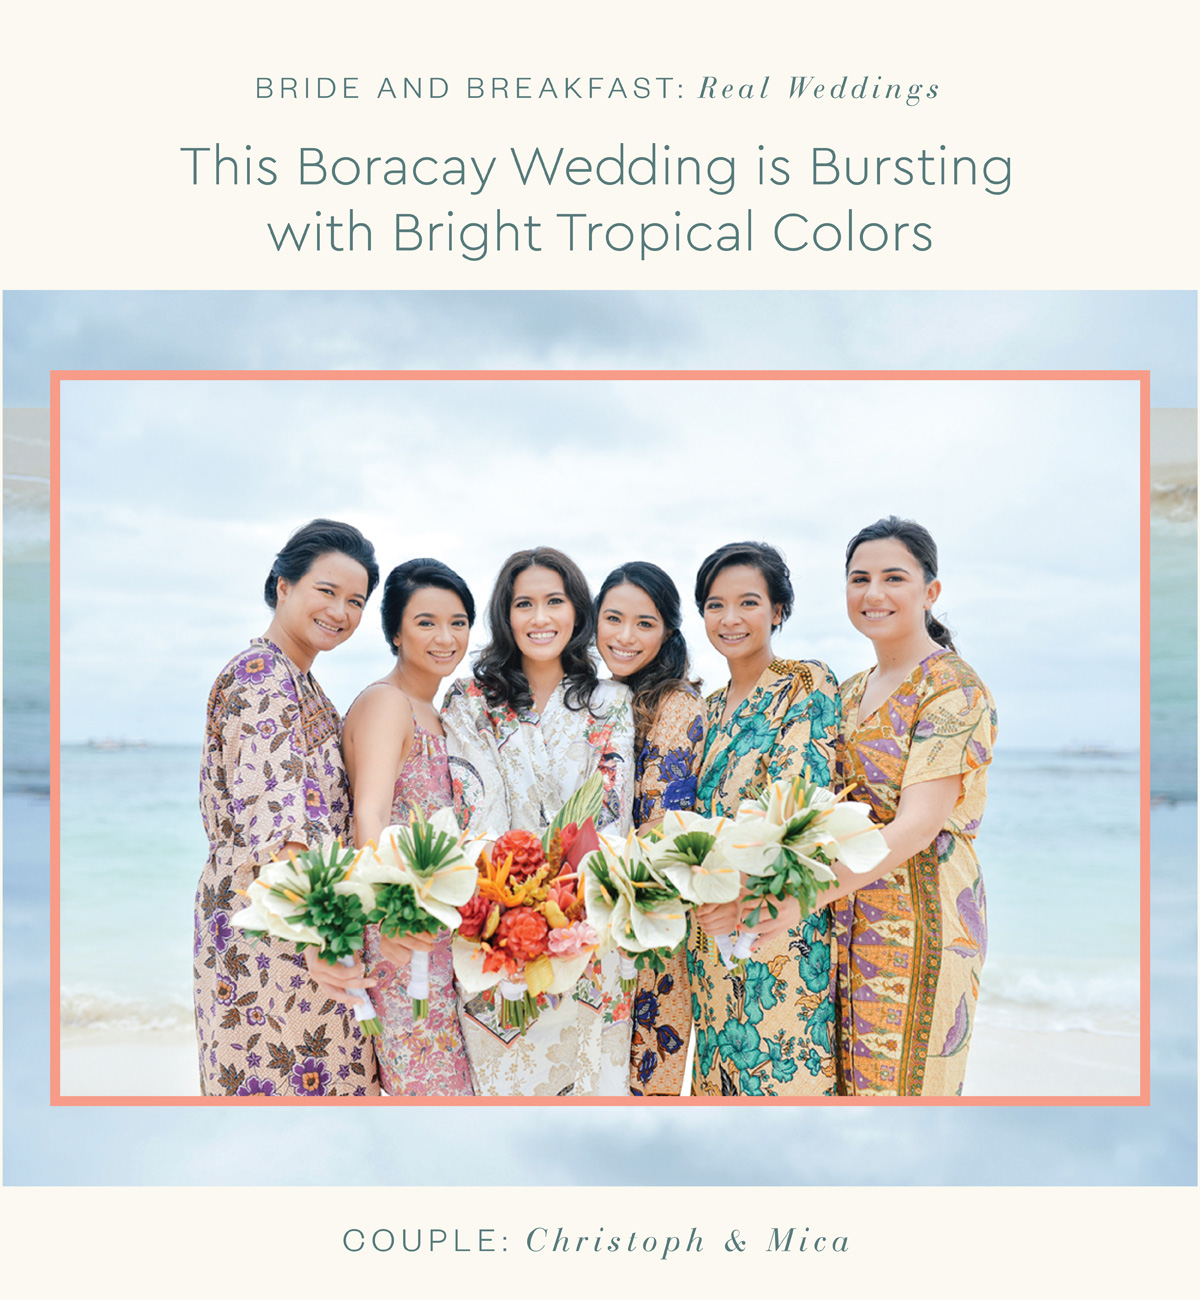 This Boracay Wedding is Bursting with Bright Tropical Colors